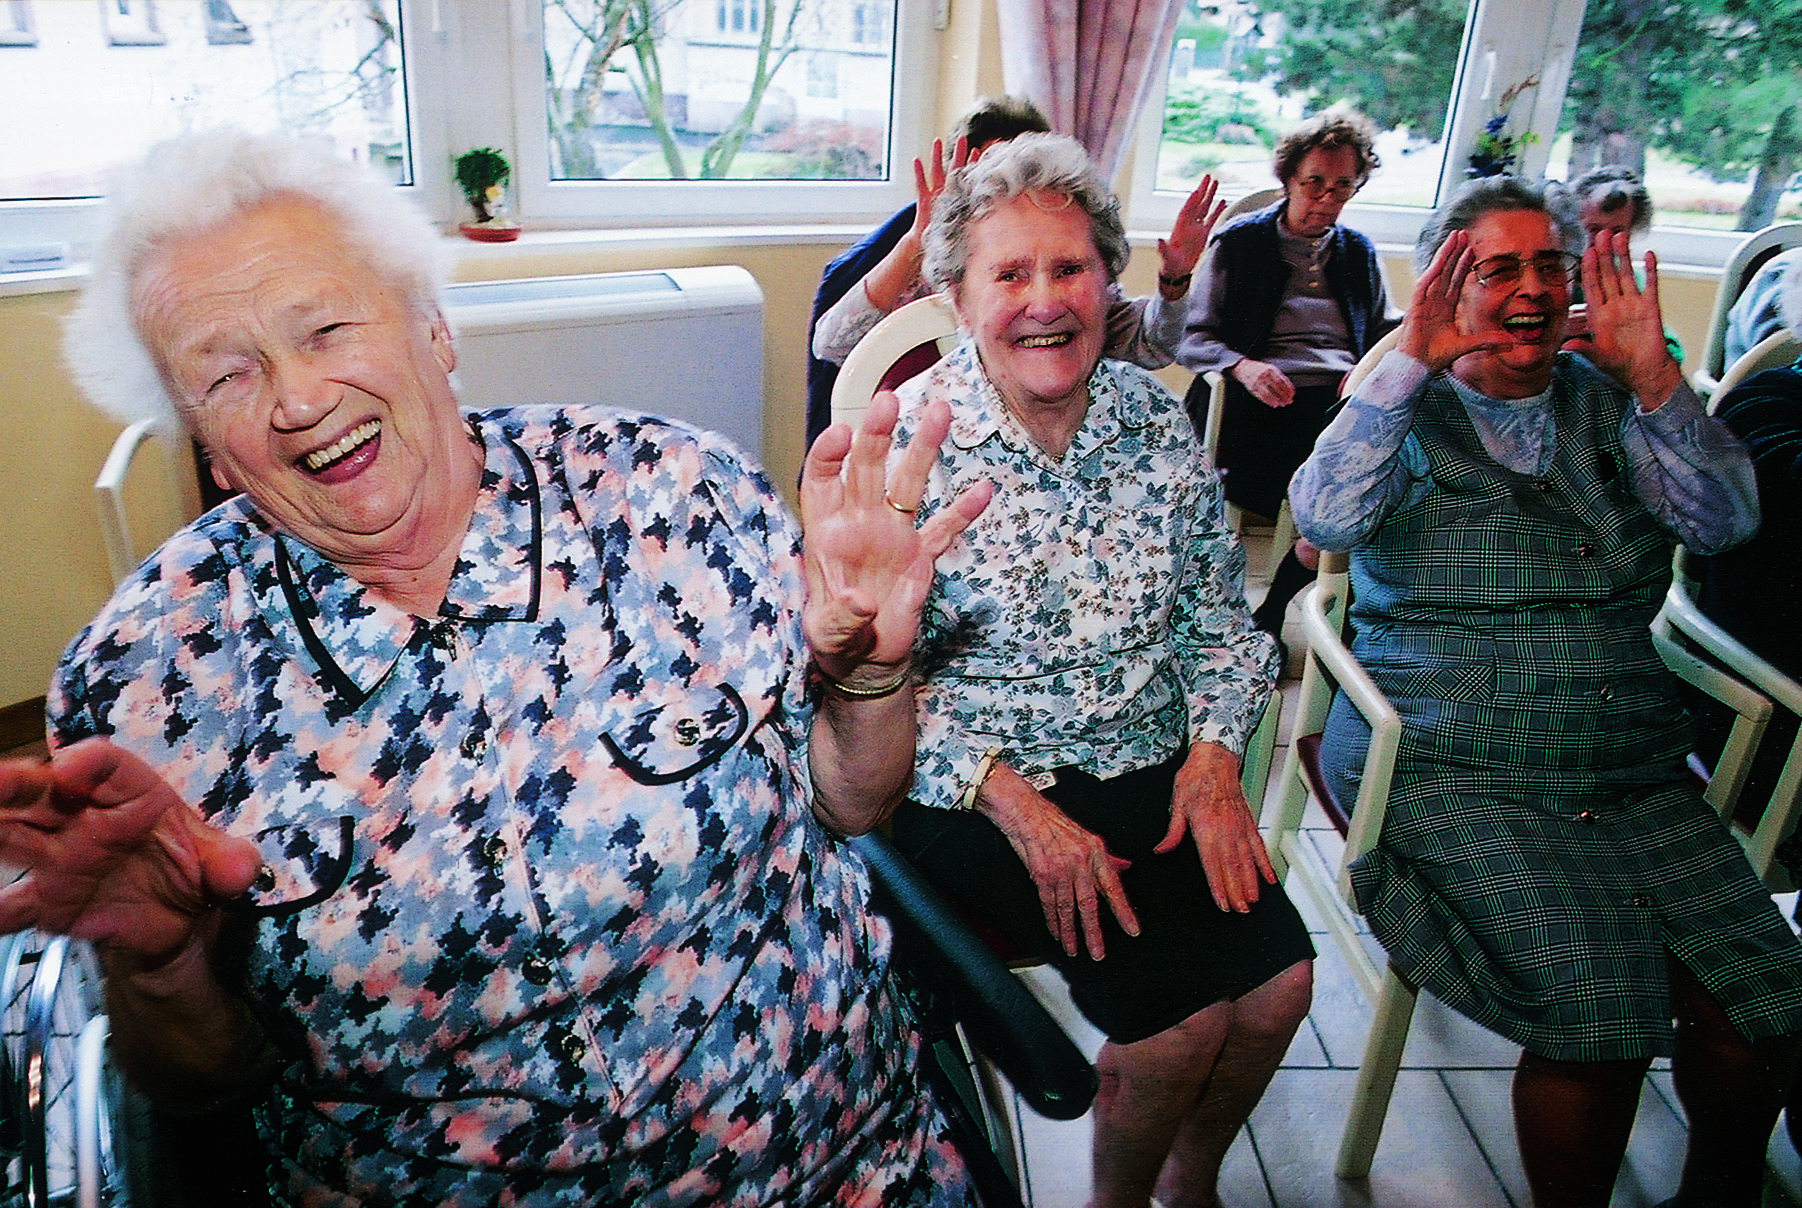 laughter-yoga-great-for-seniors-wellbeing-in-care